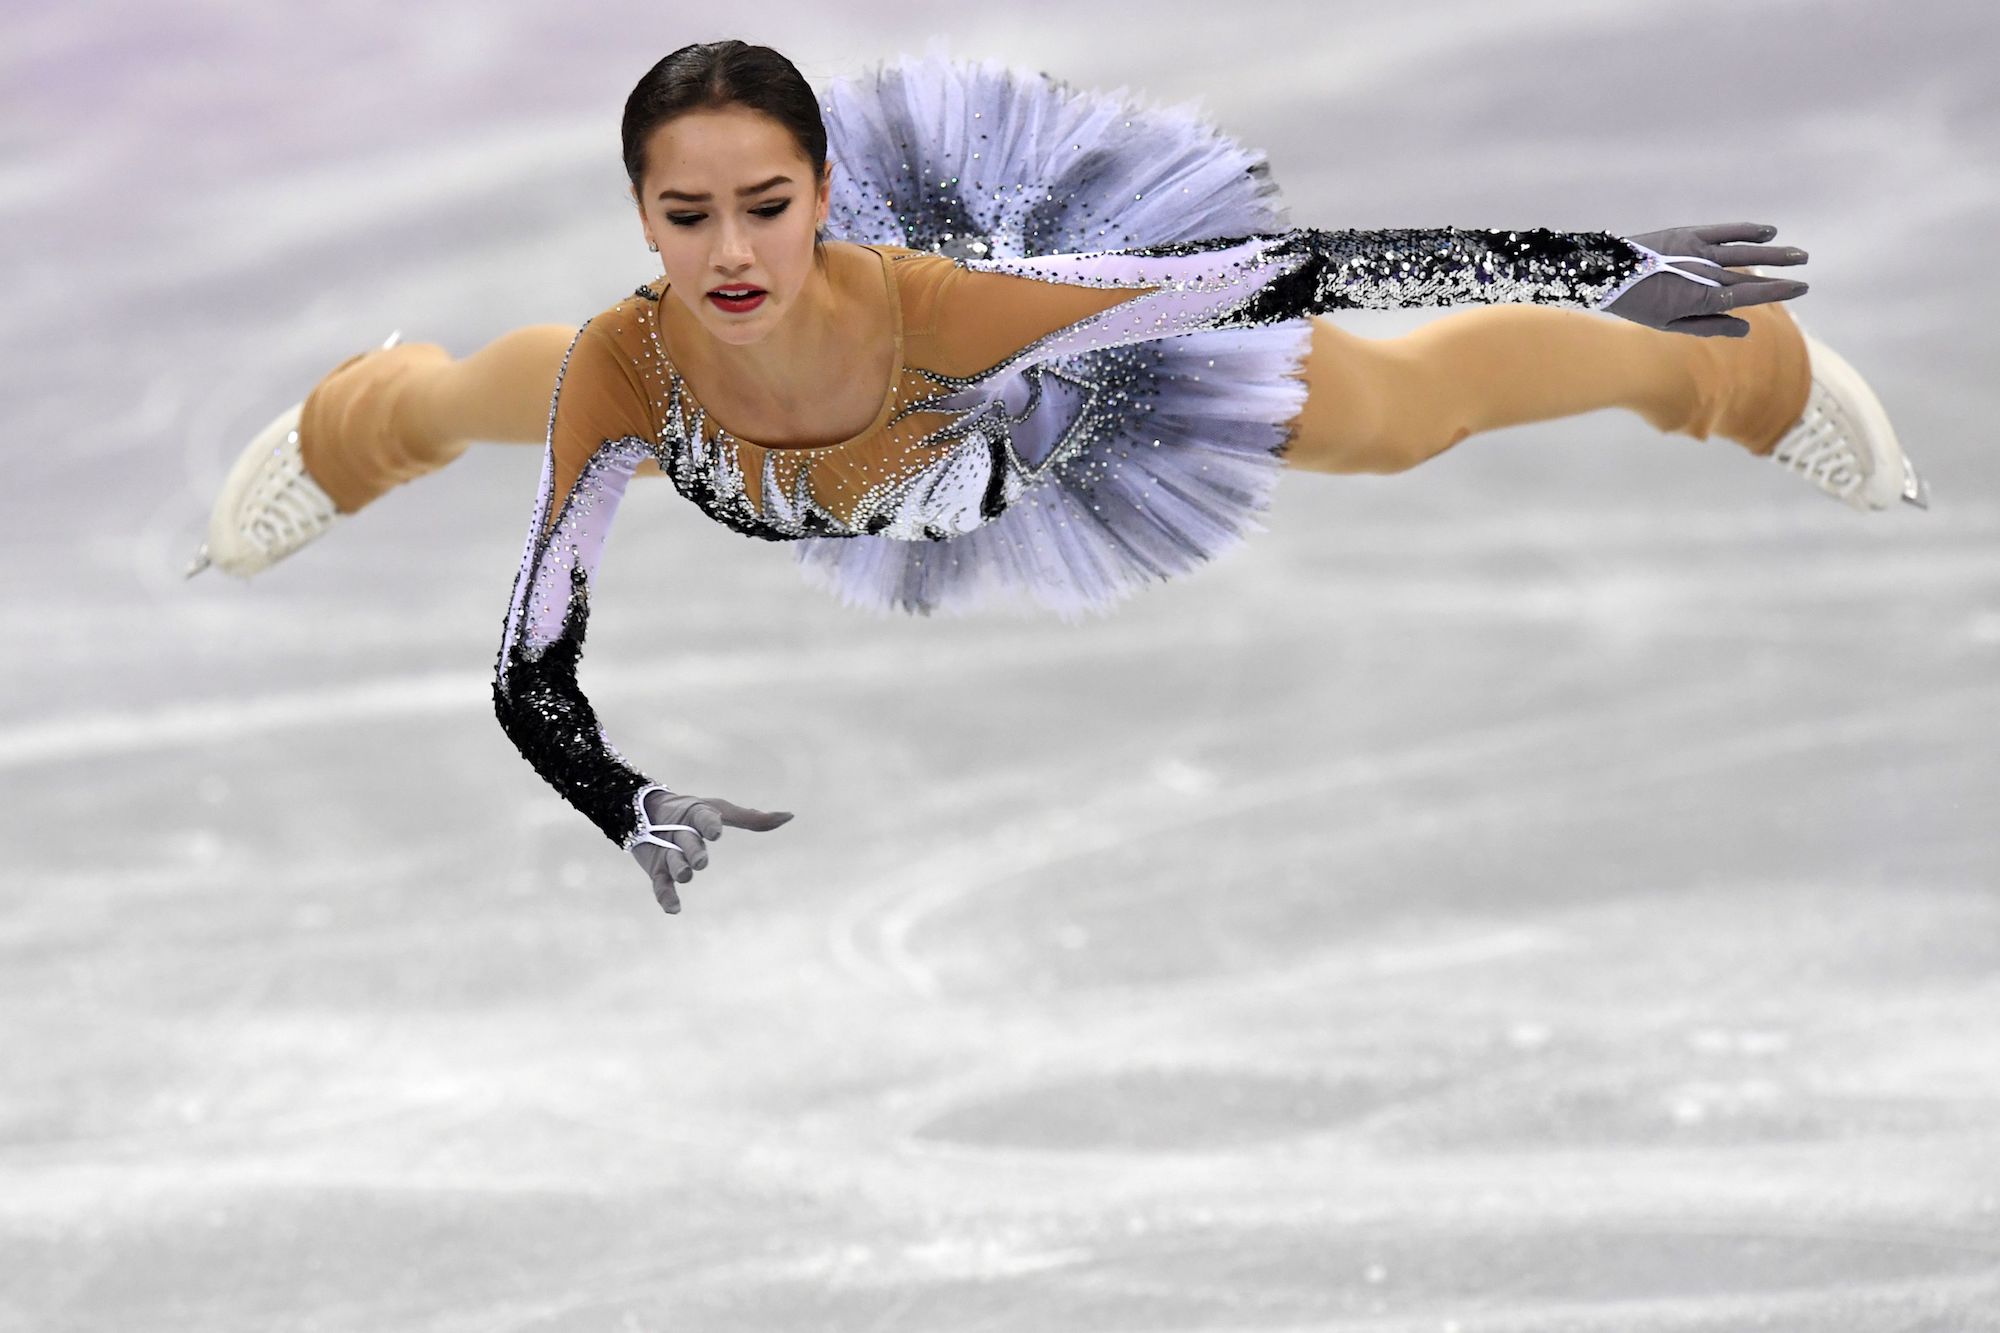 Russia's Alina Zagitova competes in the women's single skating short program of the figure skating event. | AFP-JIJI